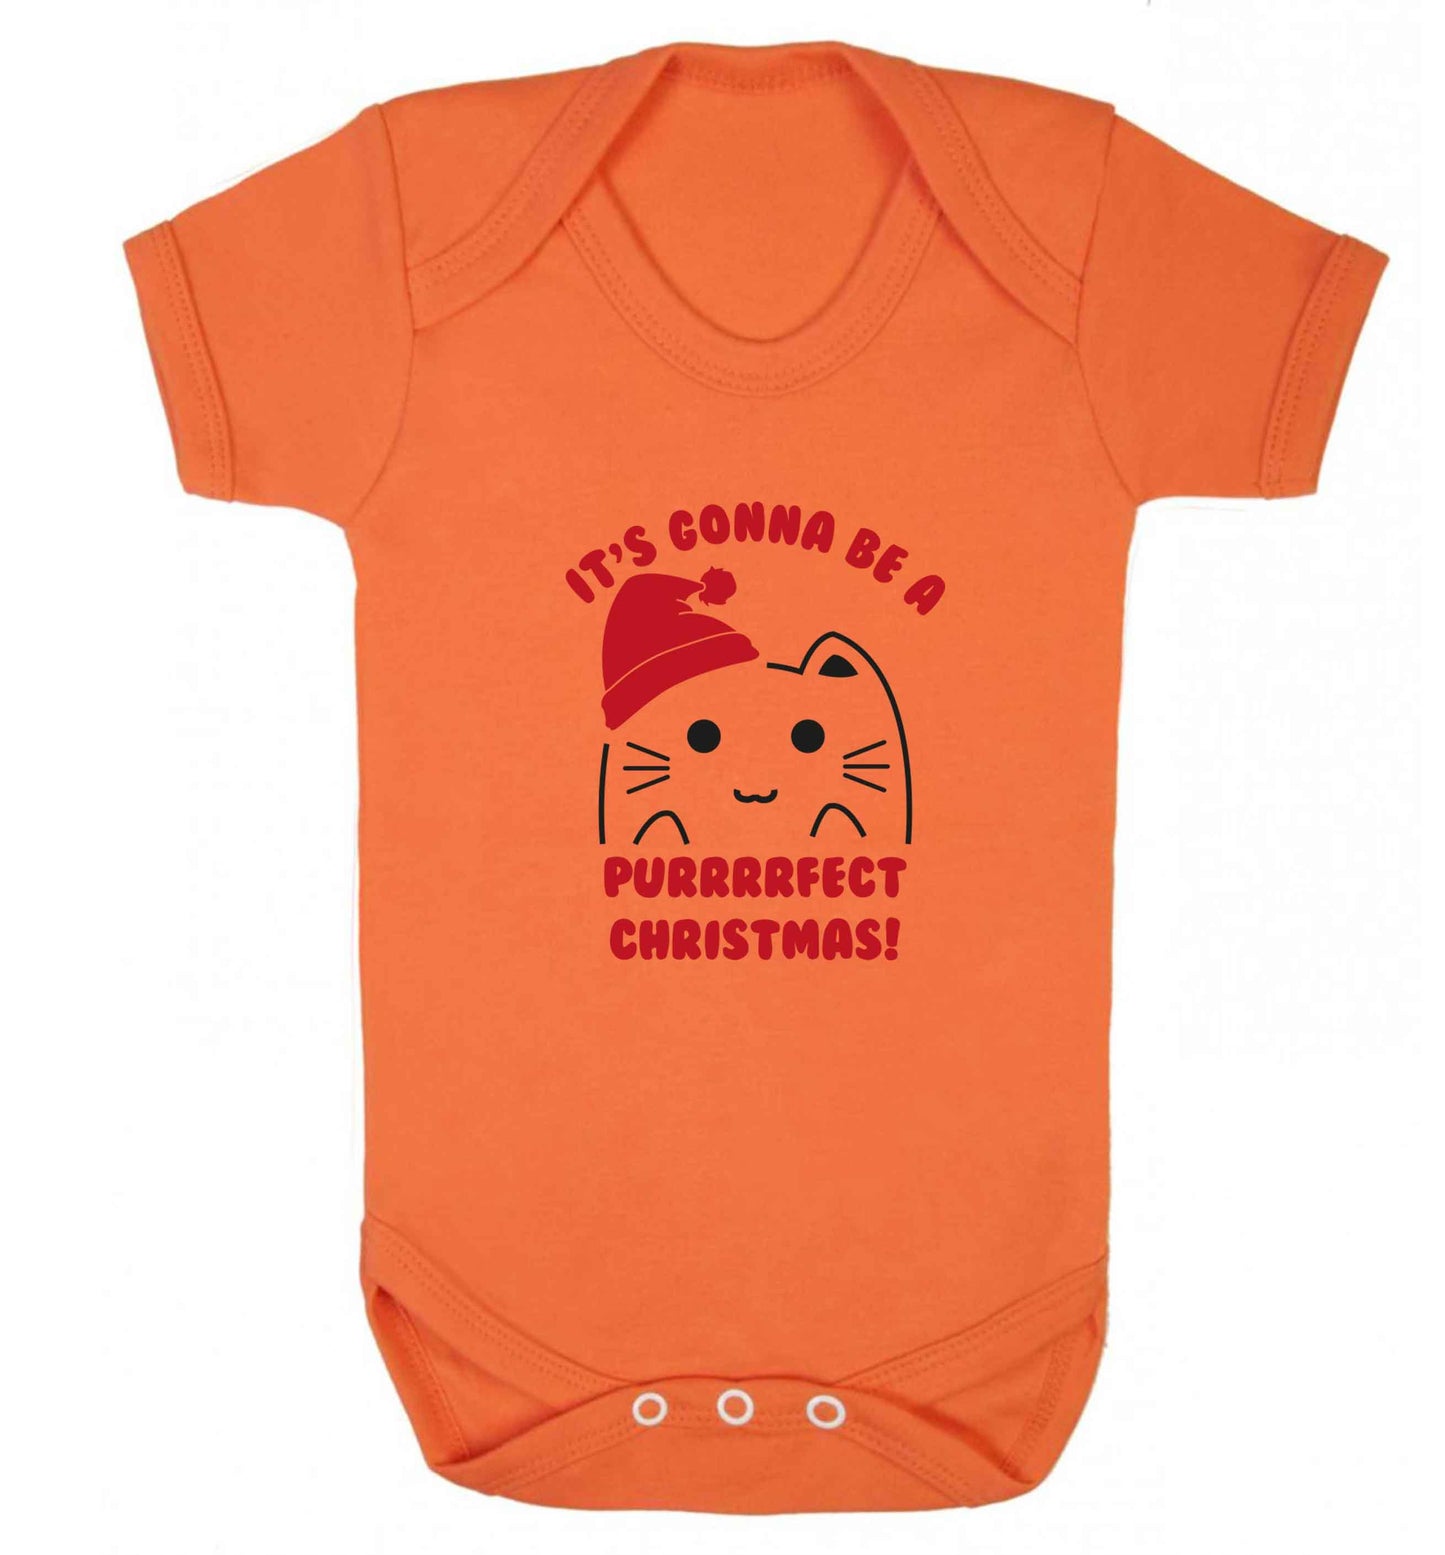 It's going to be a purrfect Christmas baby vest orange 18-24 months